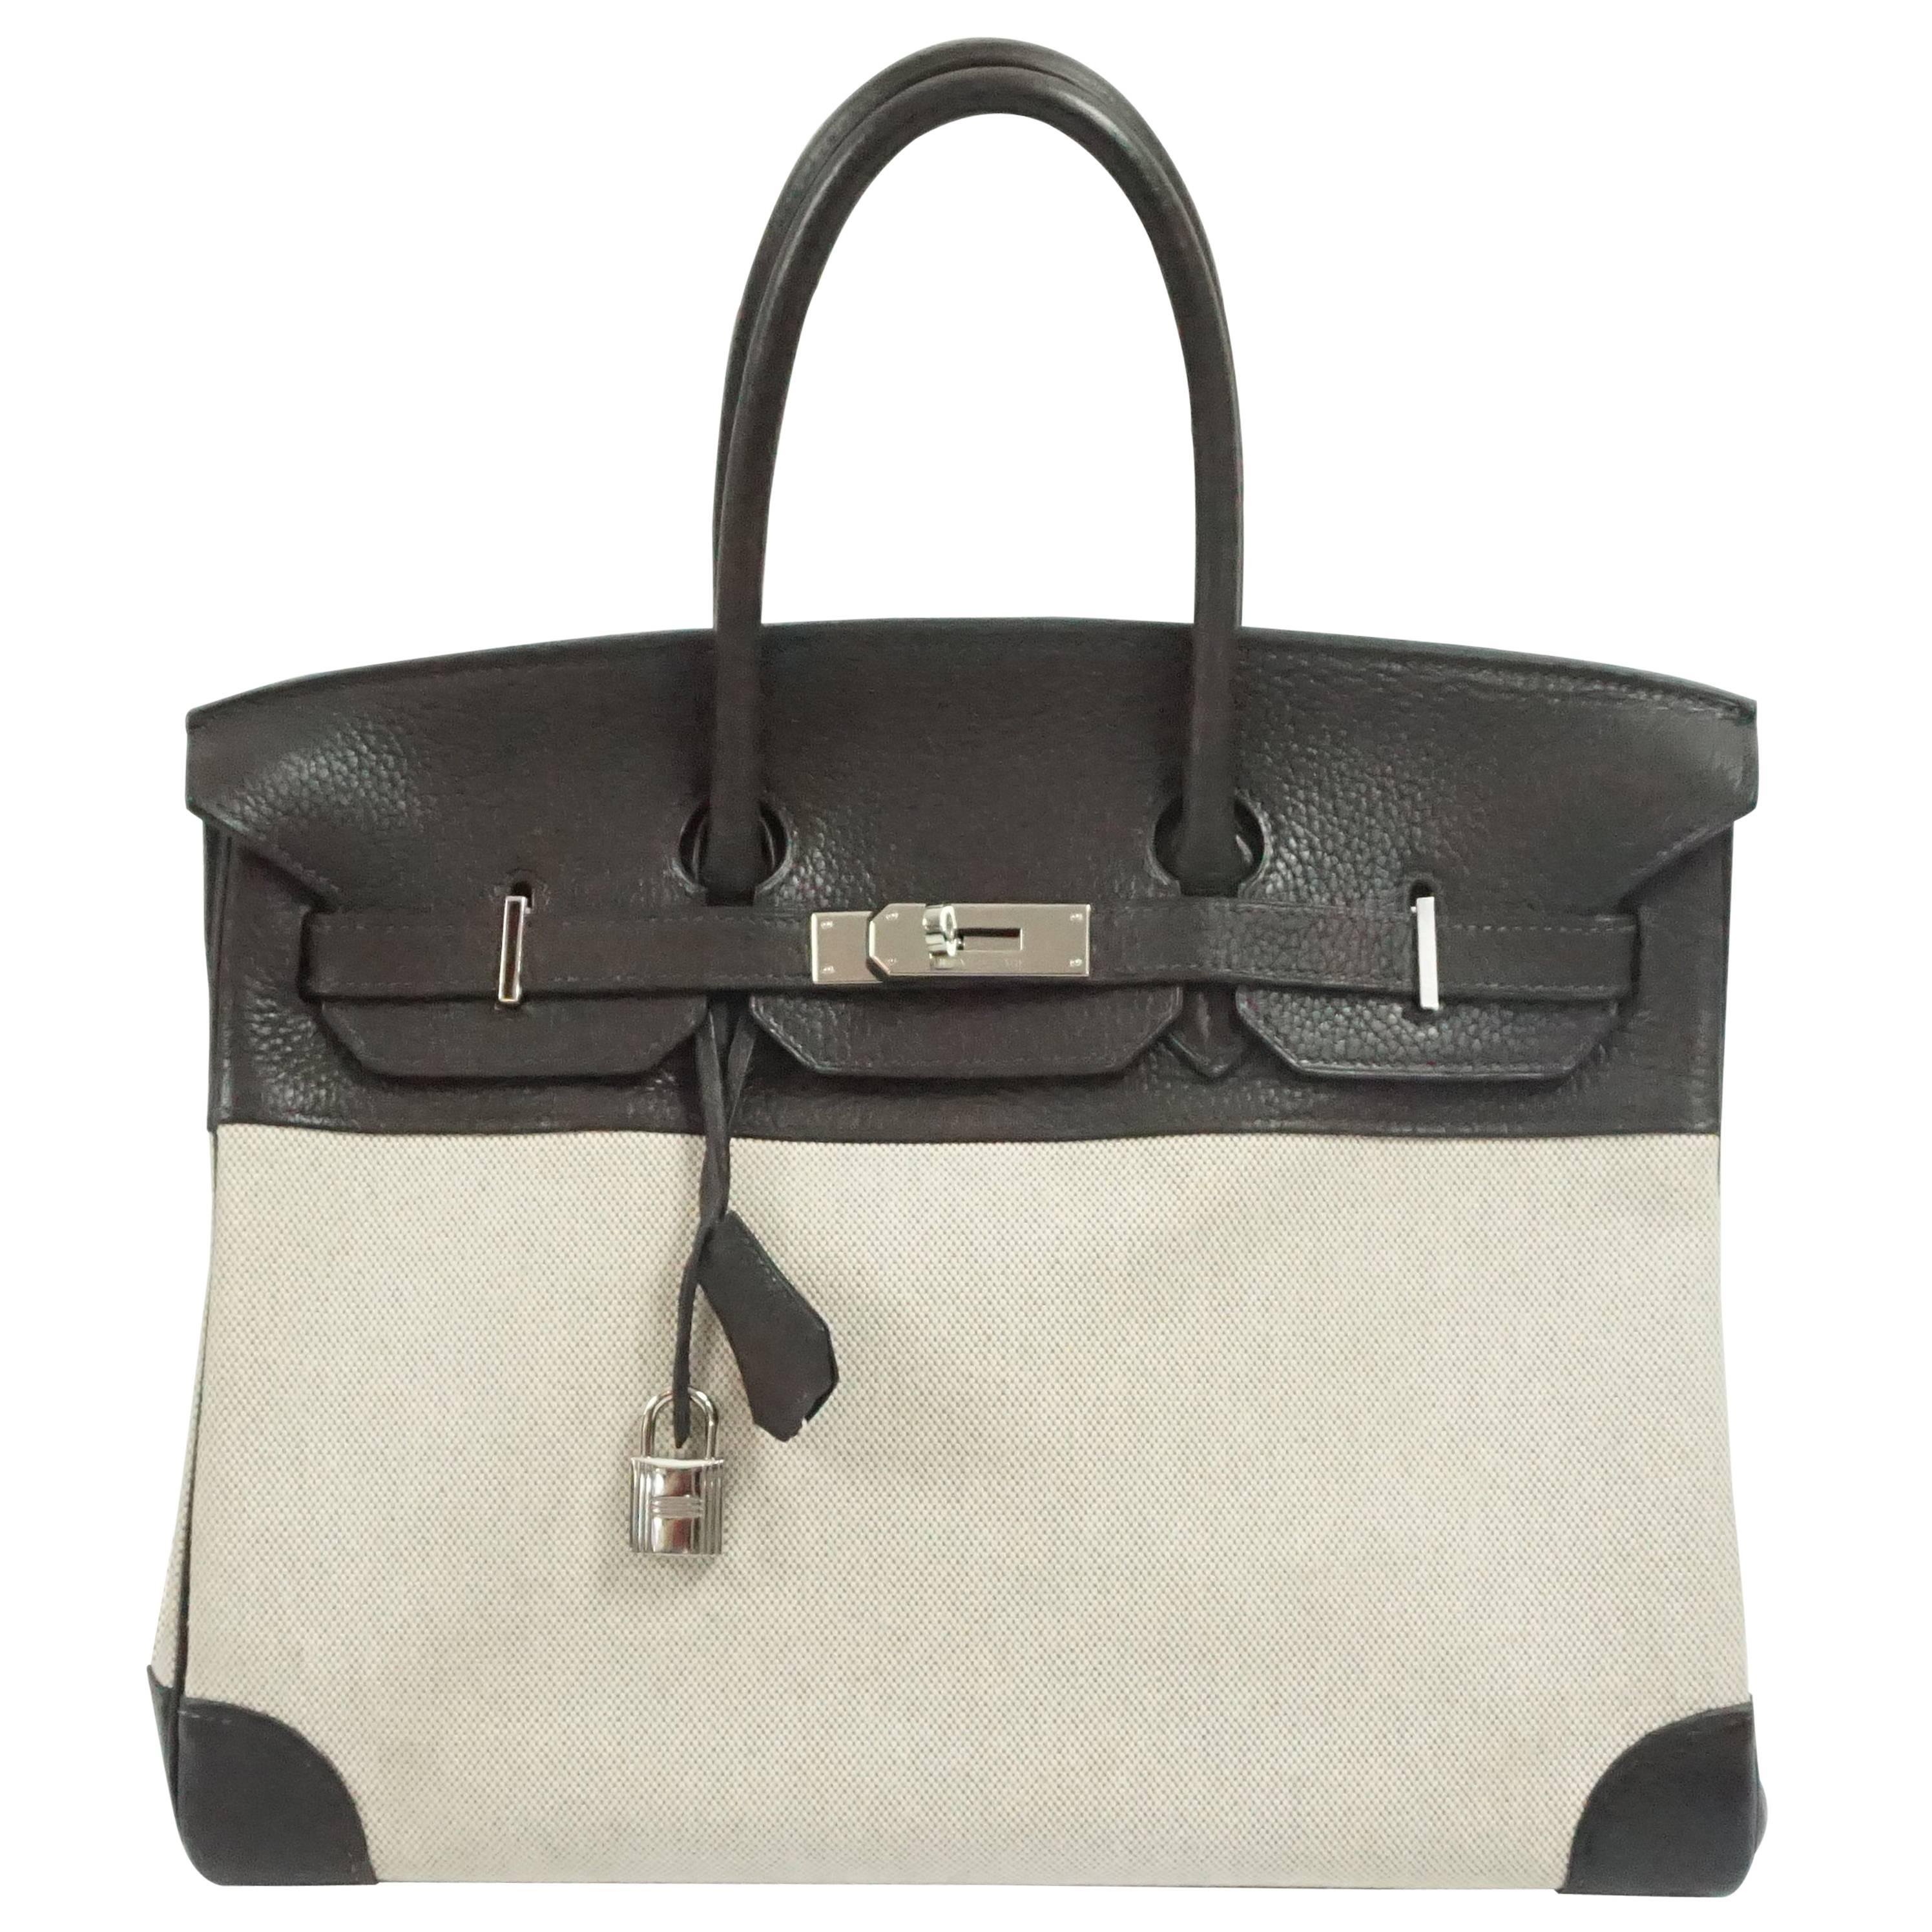 Hermes Canvas and Chocolate Brown Leather 35cm Birkin - SHW - 2006